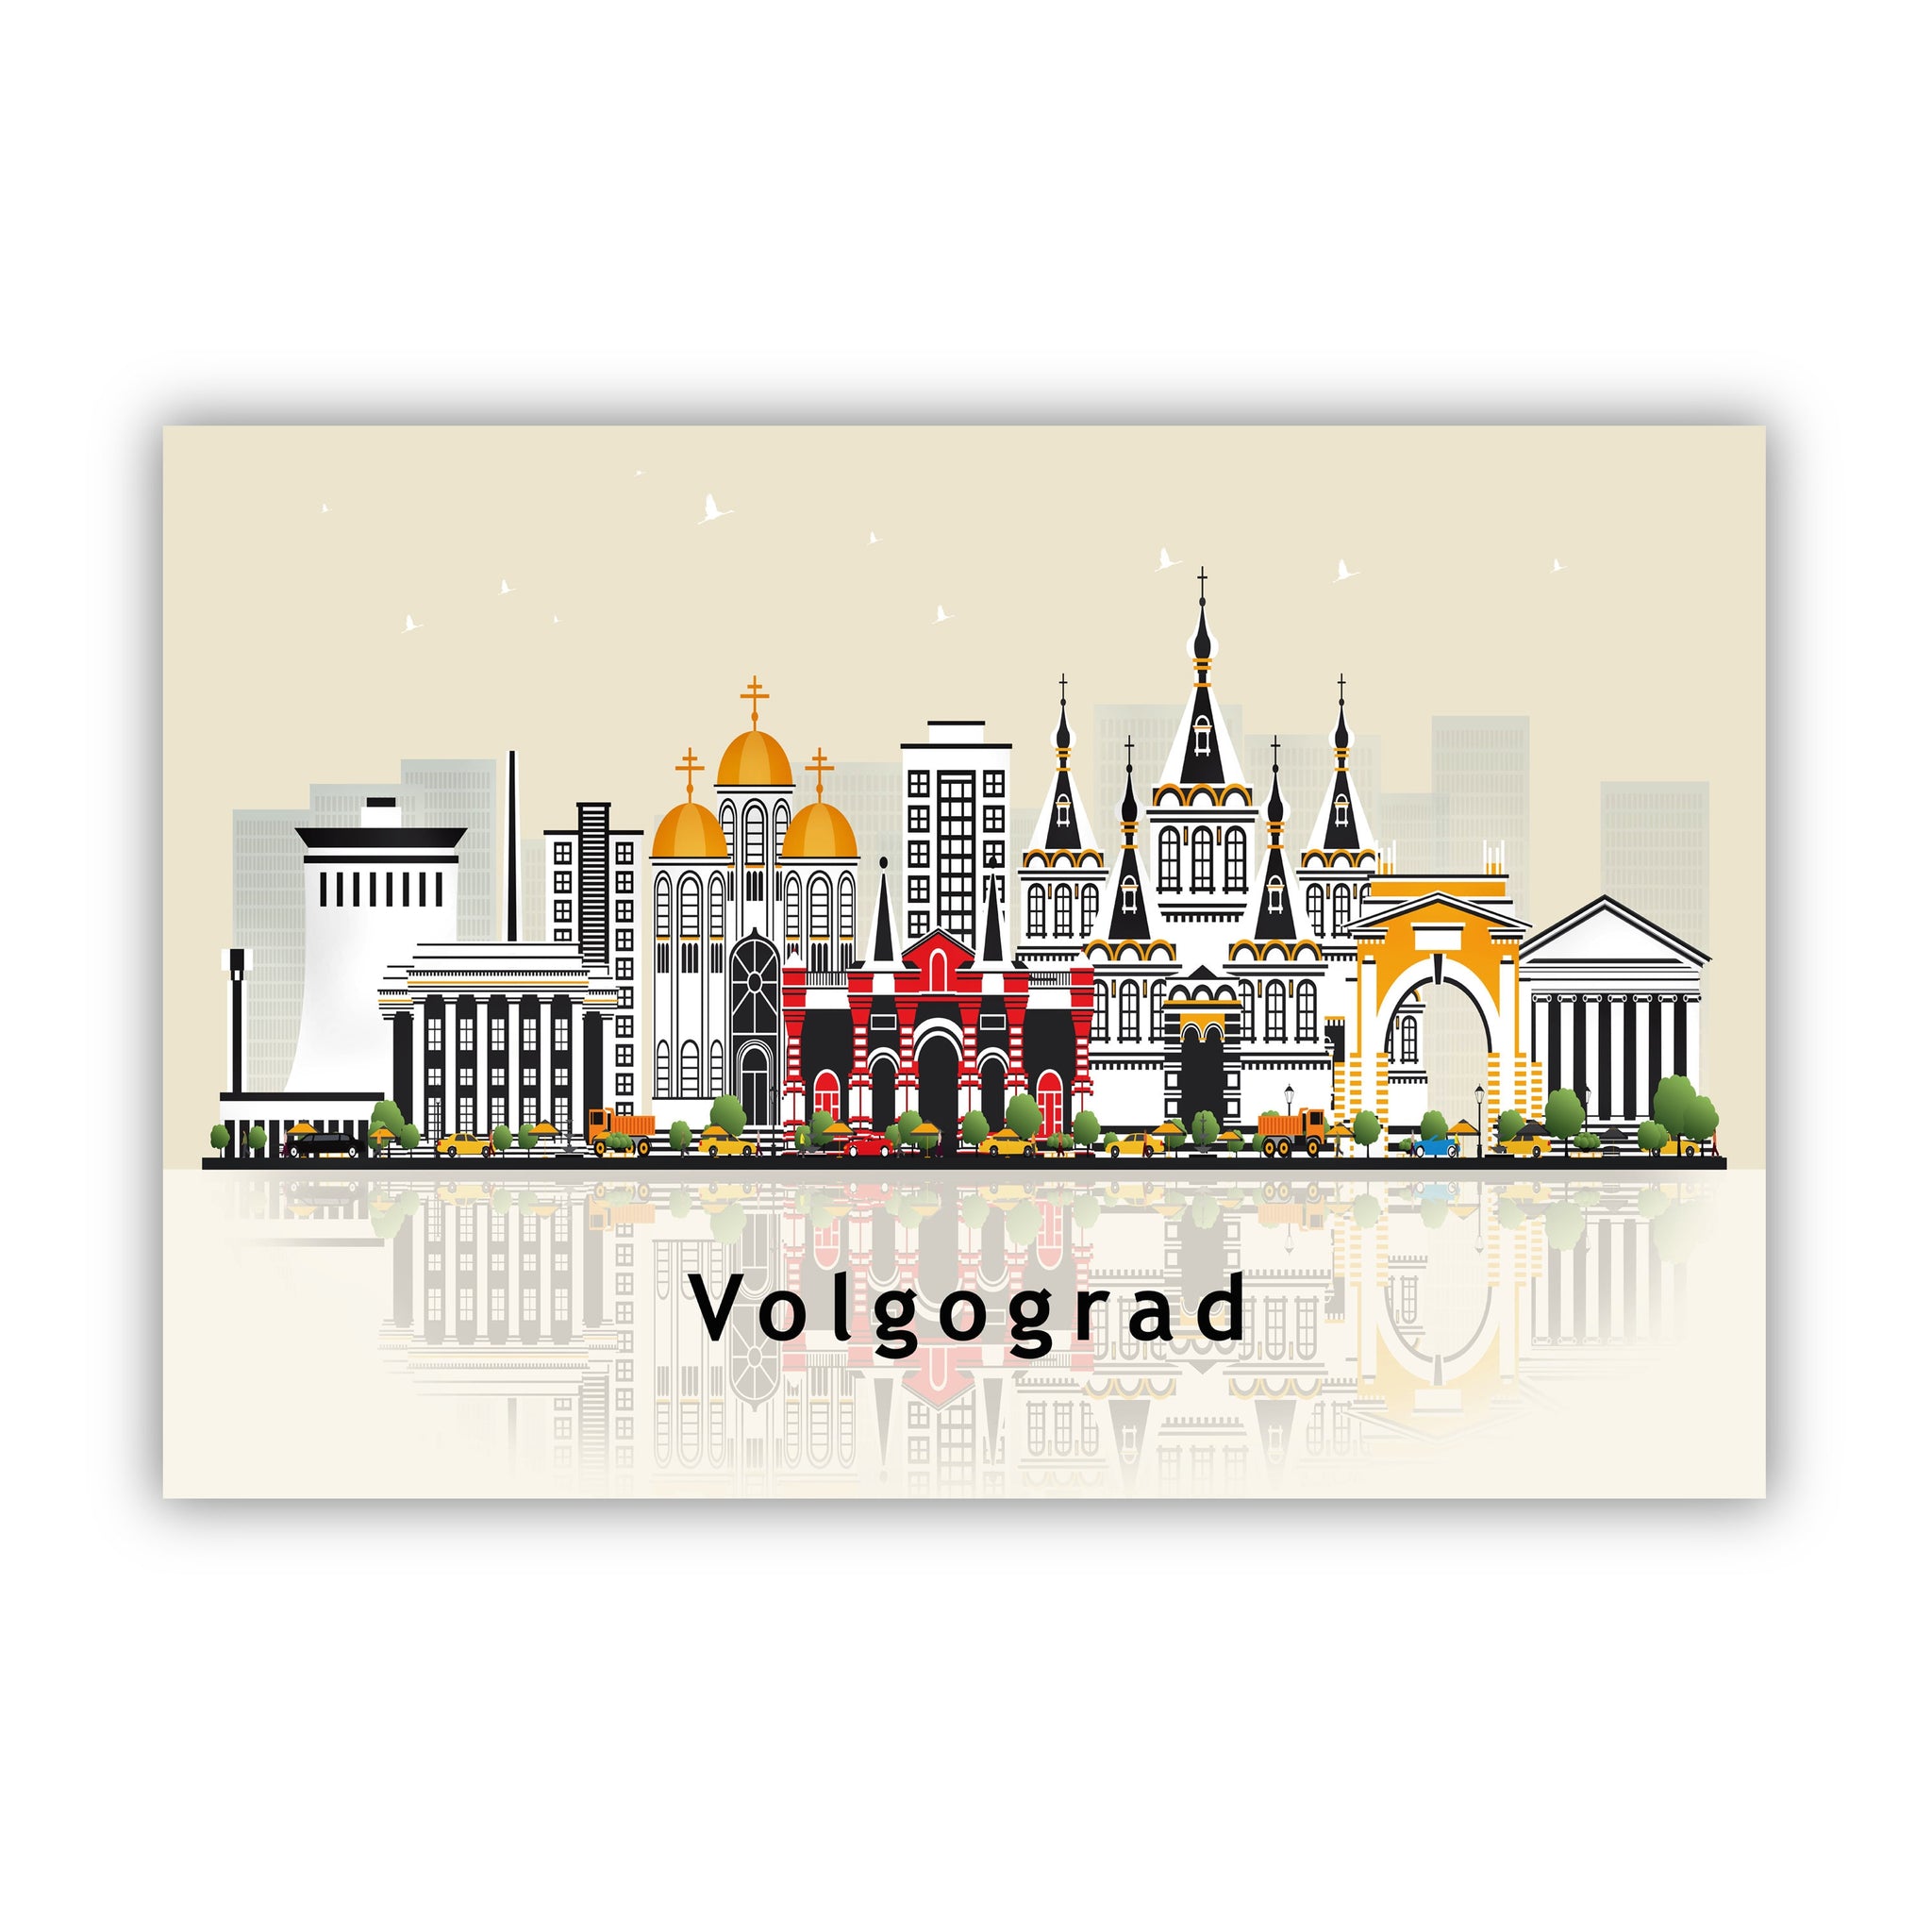 VOLGOGRAD RUSSIA Illustration skyline poster, Modern skyline cityscape poster print, VOLGOGRAD landmark map poster, Home wall decoration